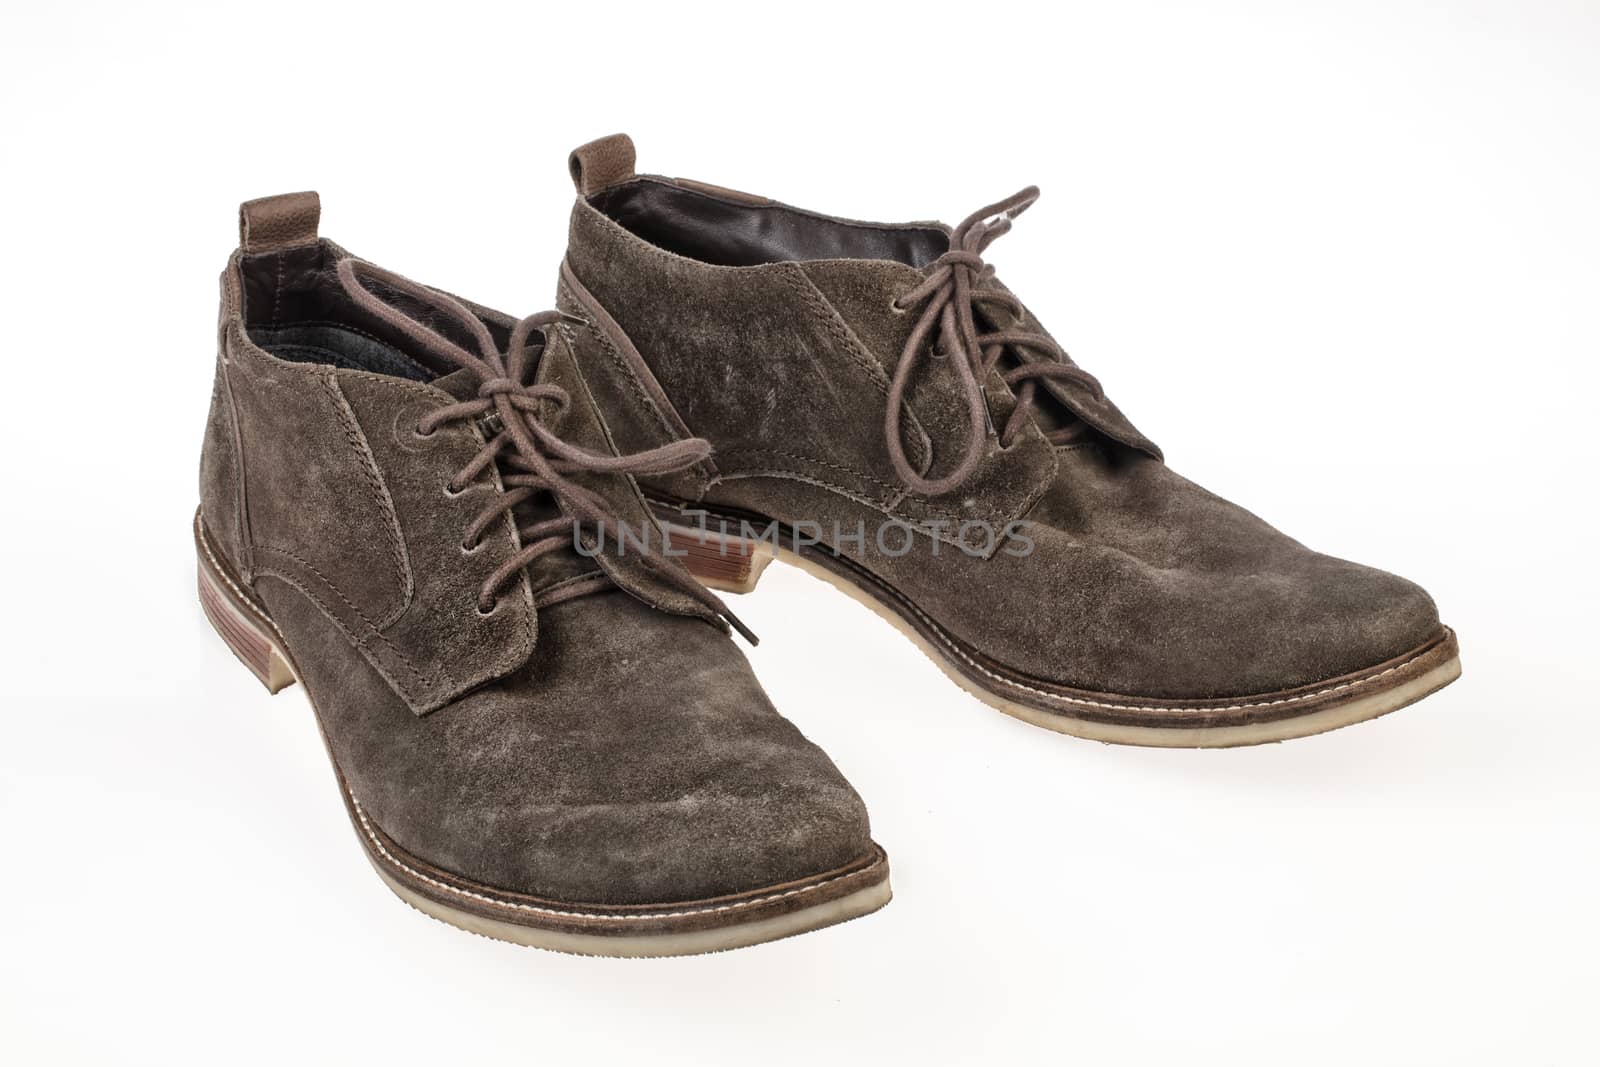 Pair of suede shoes on an isolated studio background